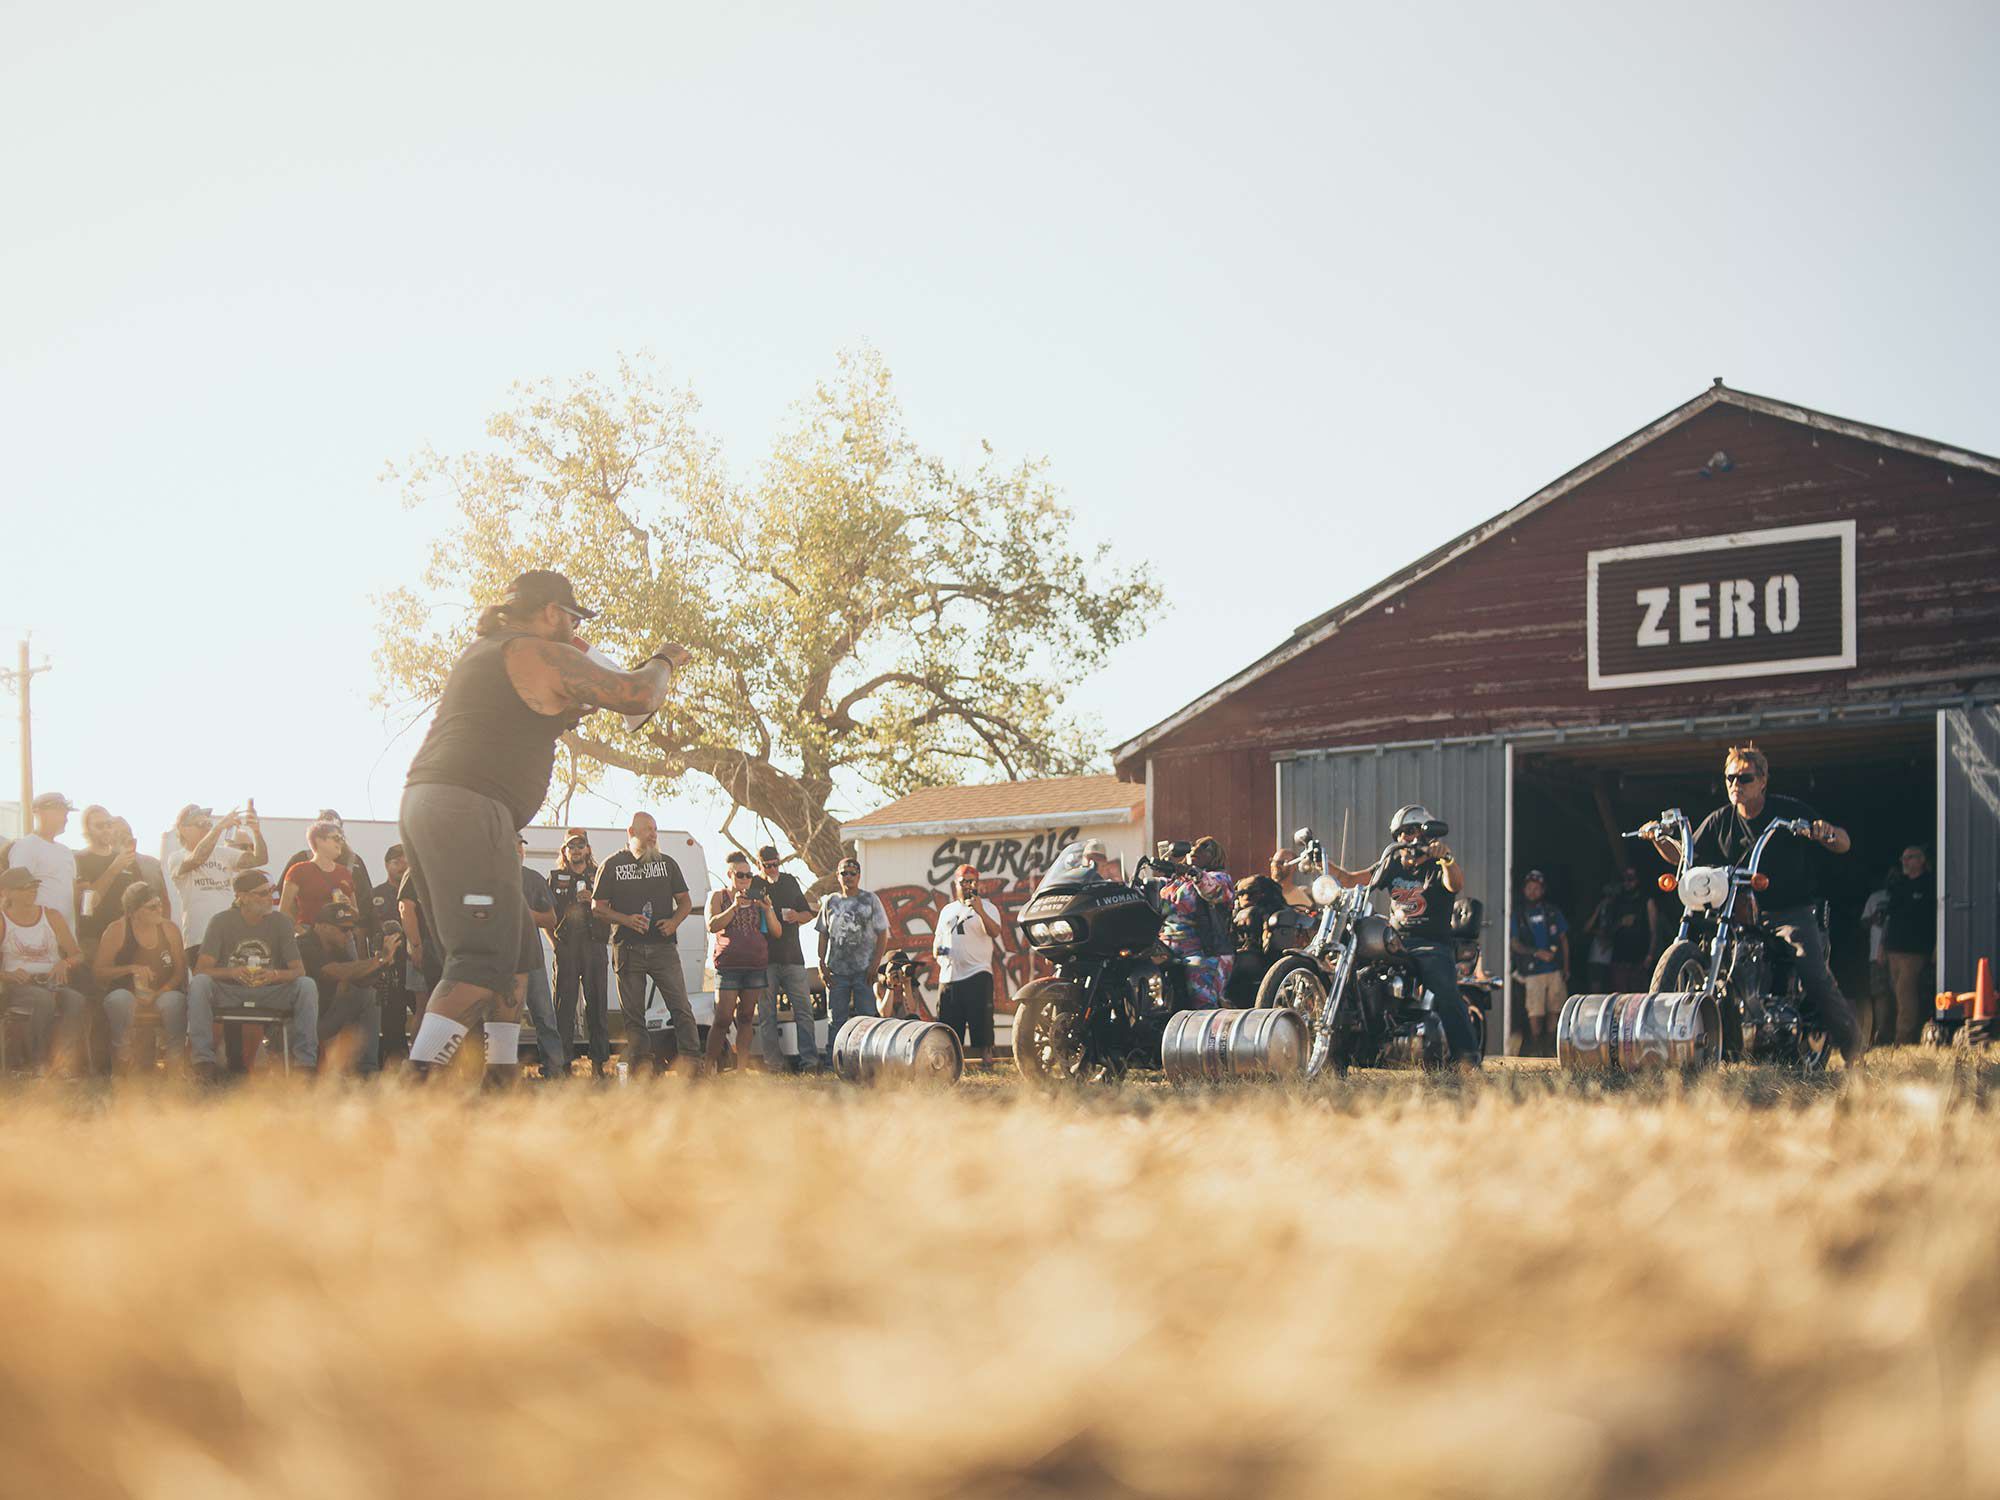 Roll out the barrels, easy on the clutch: more rodeo games at the Sturgis Buffalo Chip.